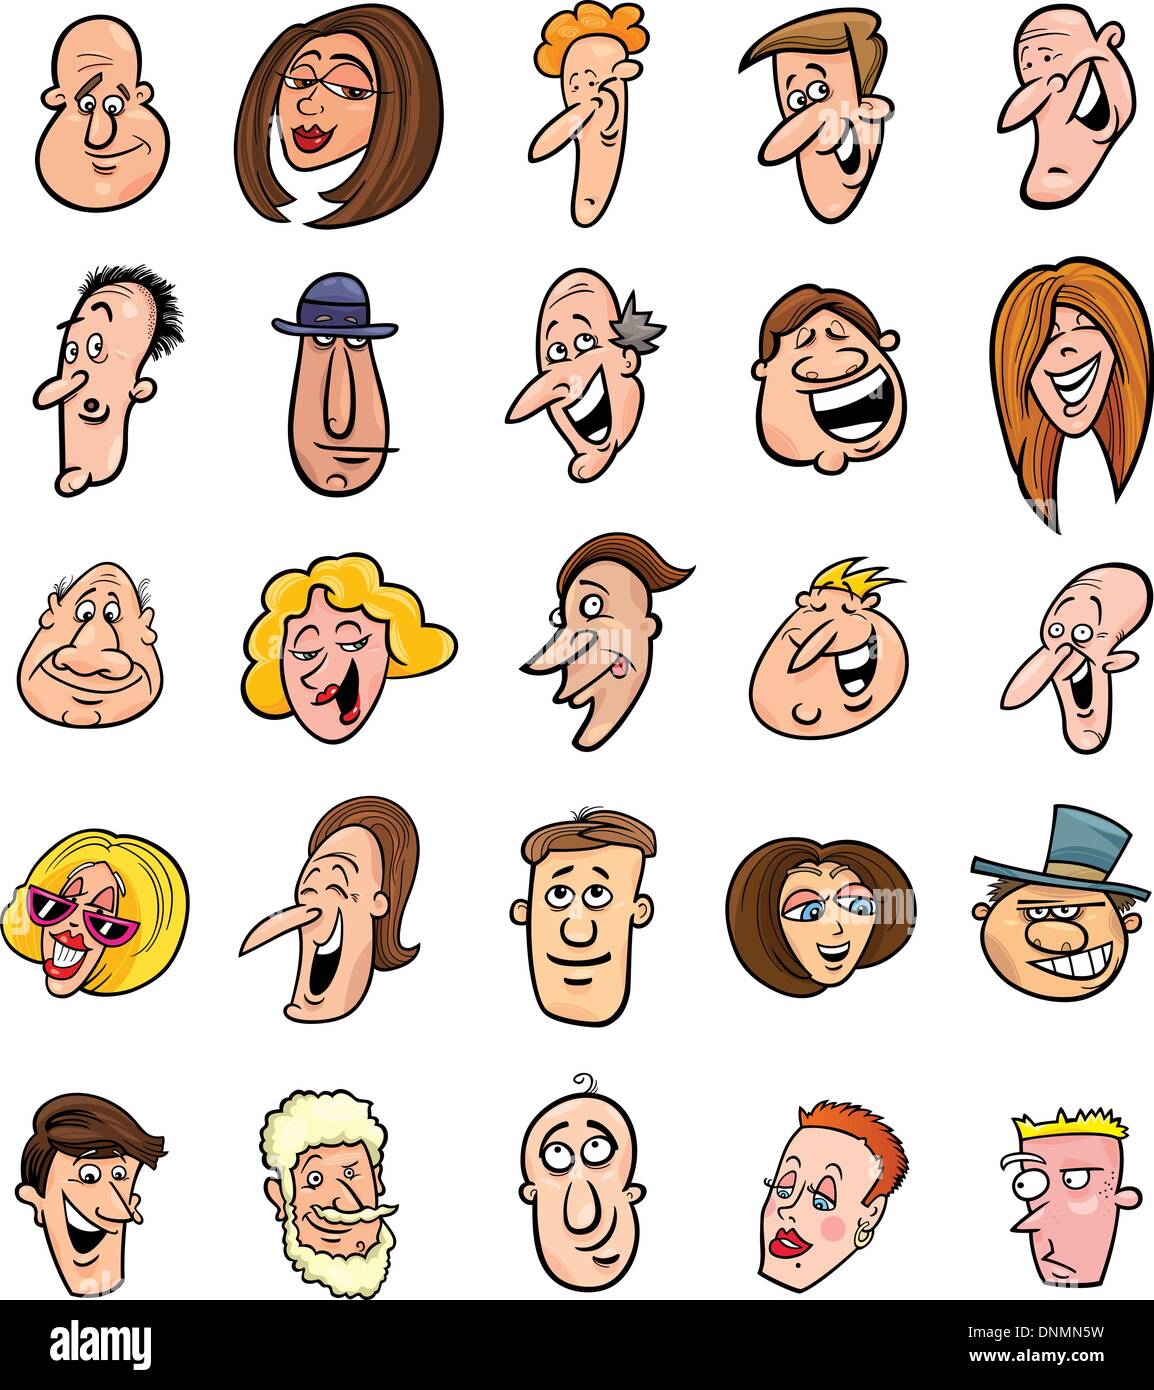 cartoon illustration of huge set of funny people faces Stock ...